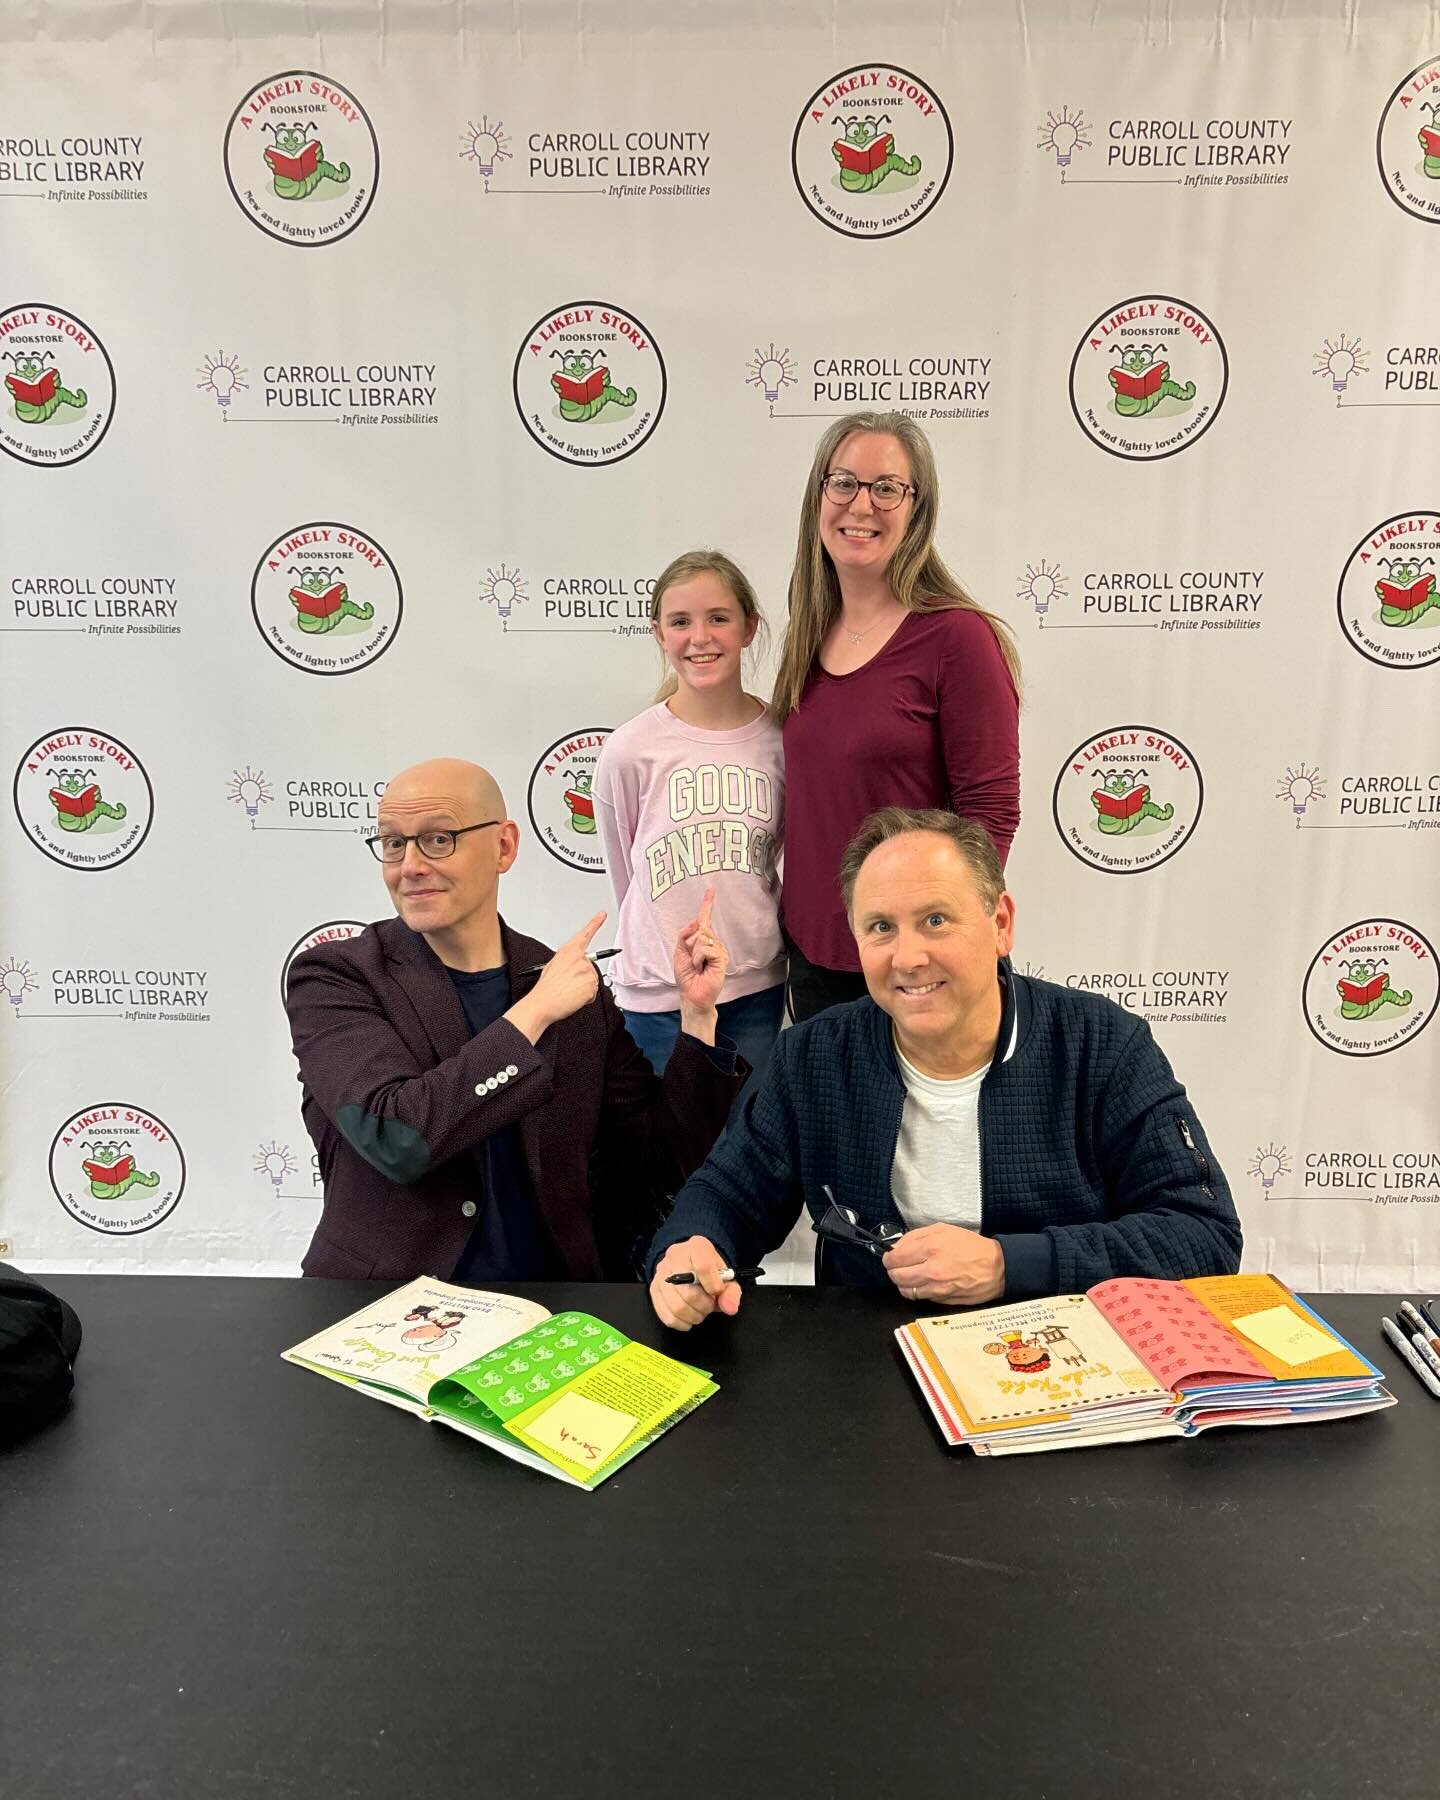 Look who we meet!
@bradmeltzer and @chriseliopoulos the author and illustrator of the &ldquo;I am..&rdquo; series.  Thank you for inspiring my daughter for all these years &hellip;. And me too! 🙏